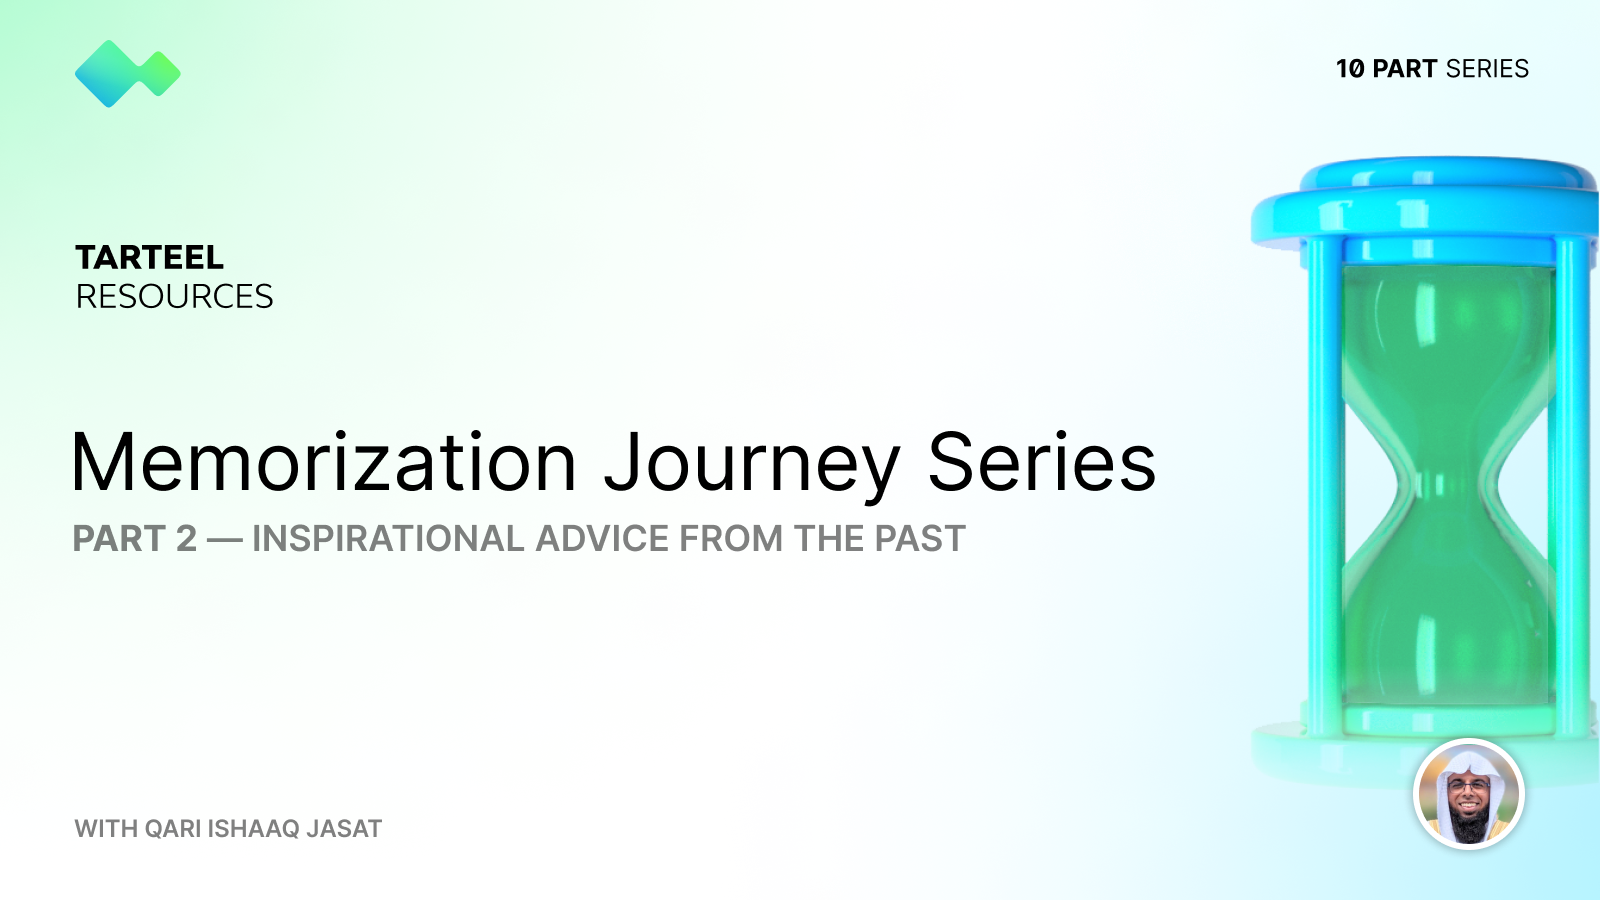 Quran Memorization Journey Tips — Inspirational Advice from the Past